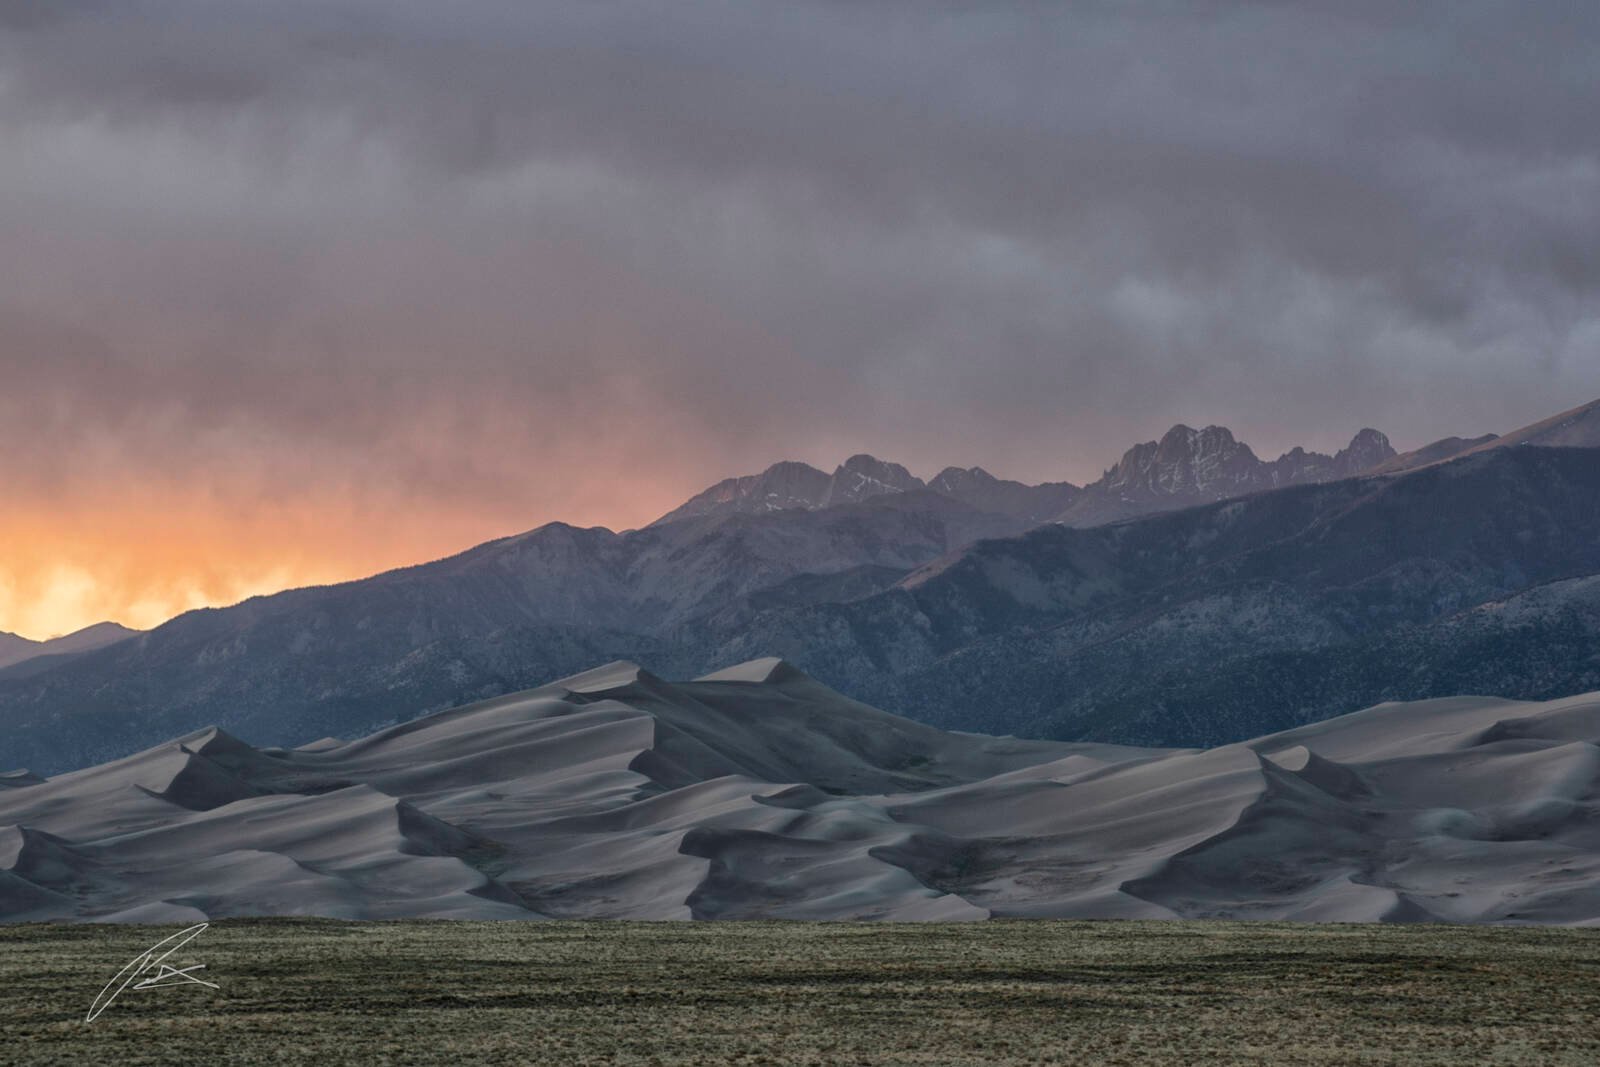 Image of Great Sand Dunes Sunset Mountain View C0-150 by Patrick Hulley